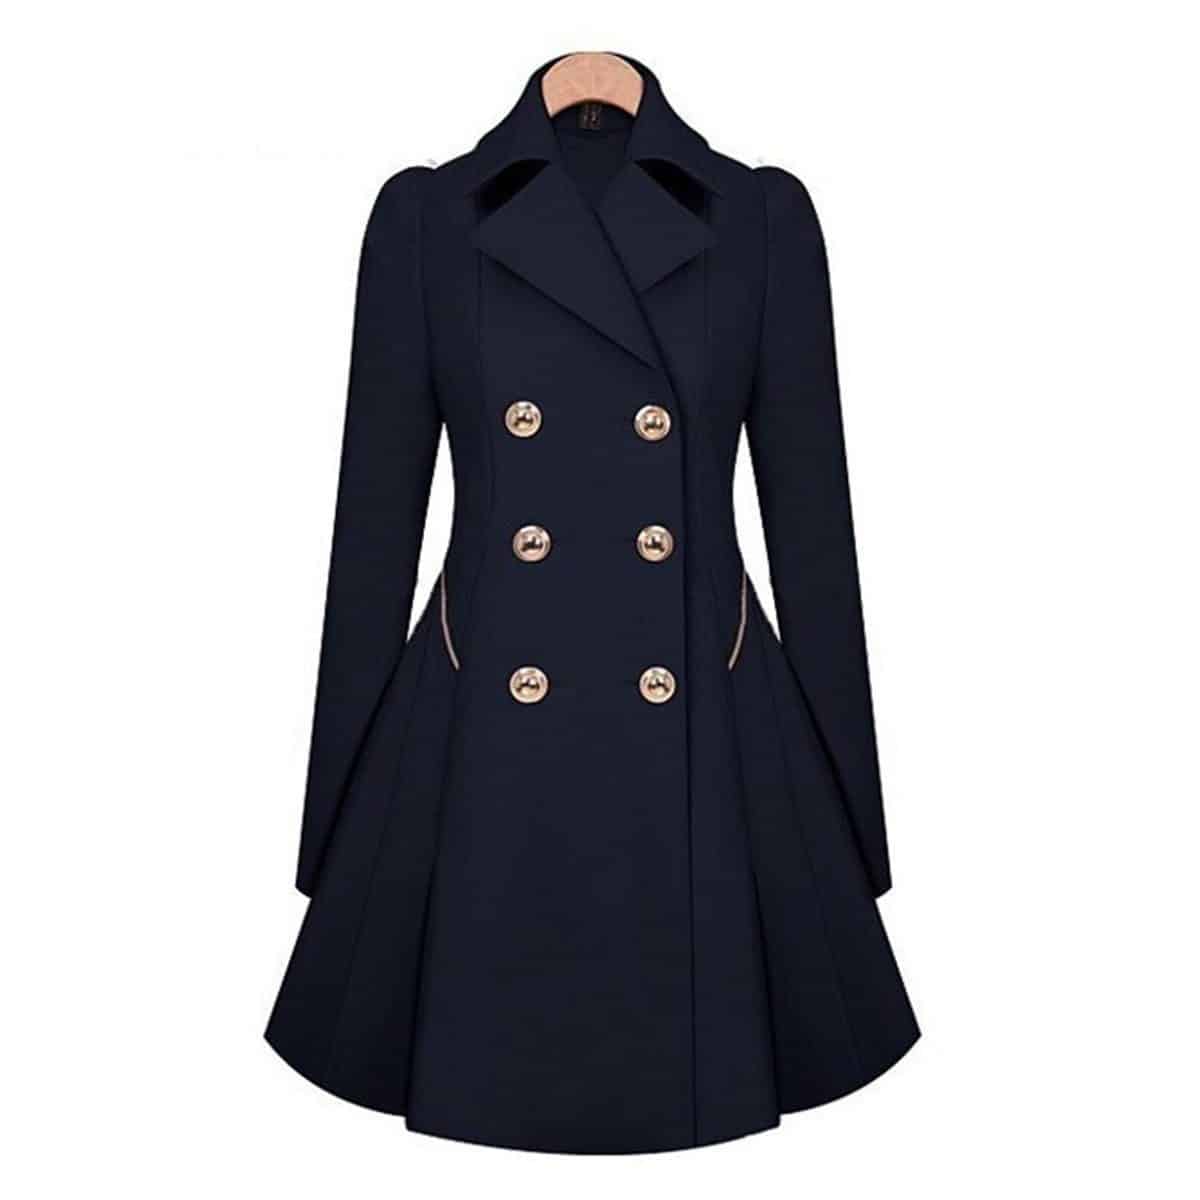 Office Lady Warm Winter Trench Coat - The Black Ravens